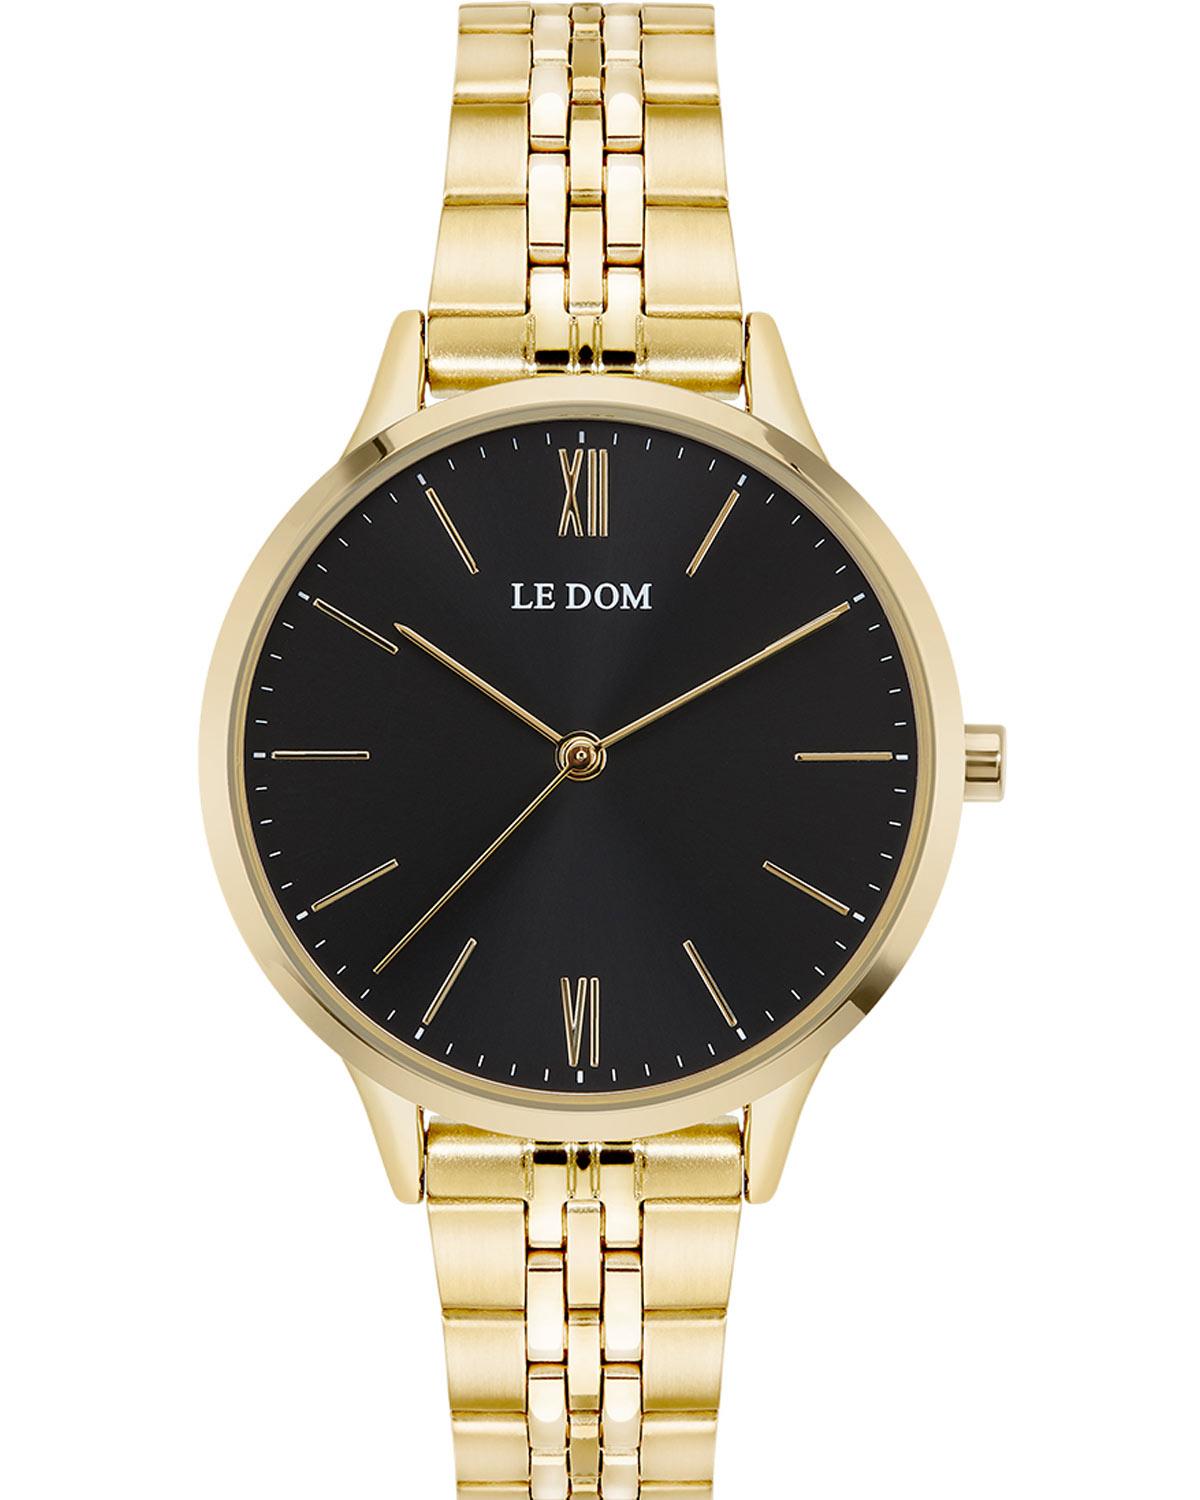 le dom essence ld 1275 5 gold case with stainless steel bracelet image1